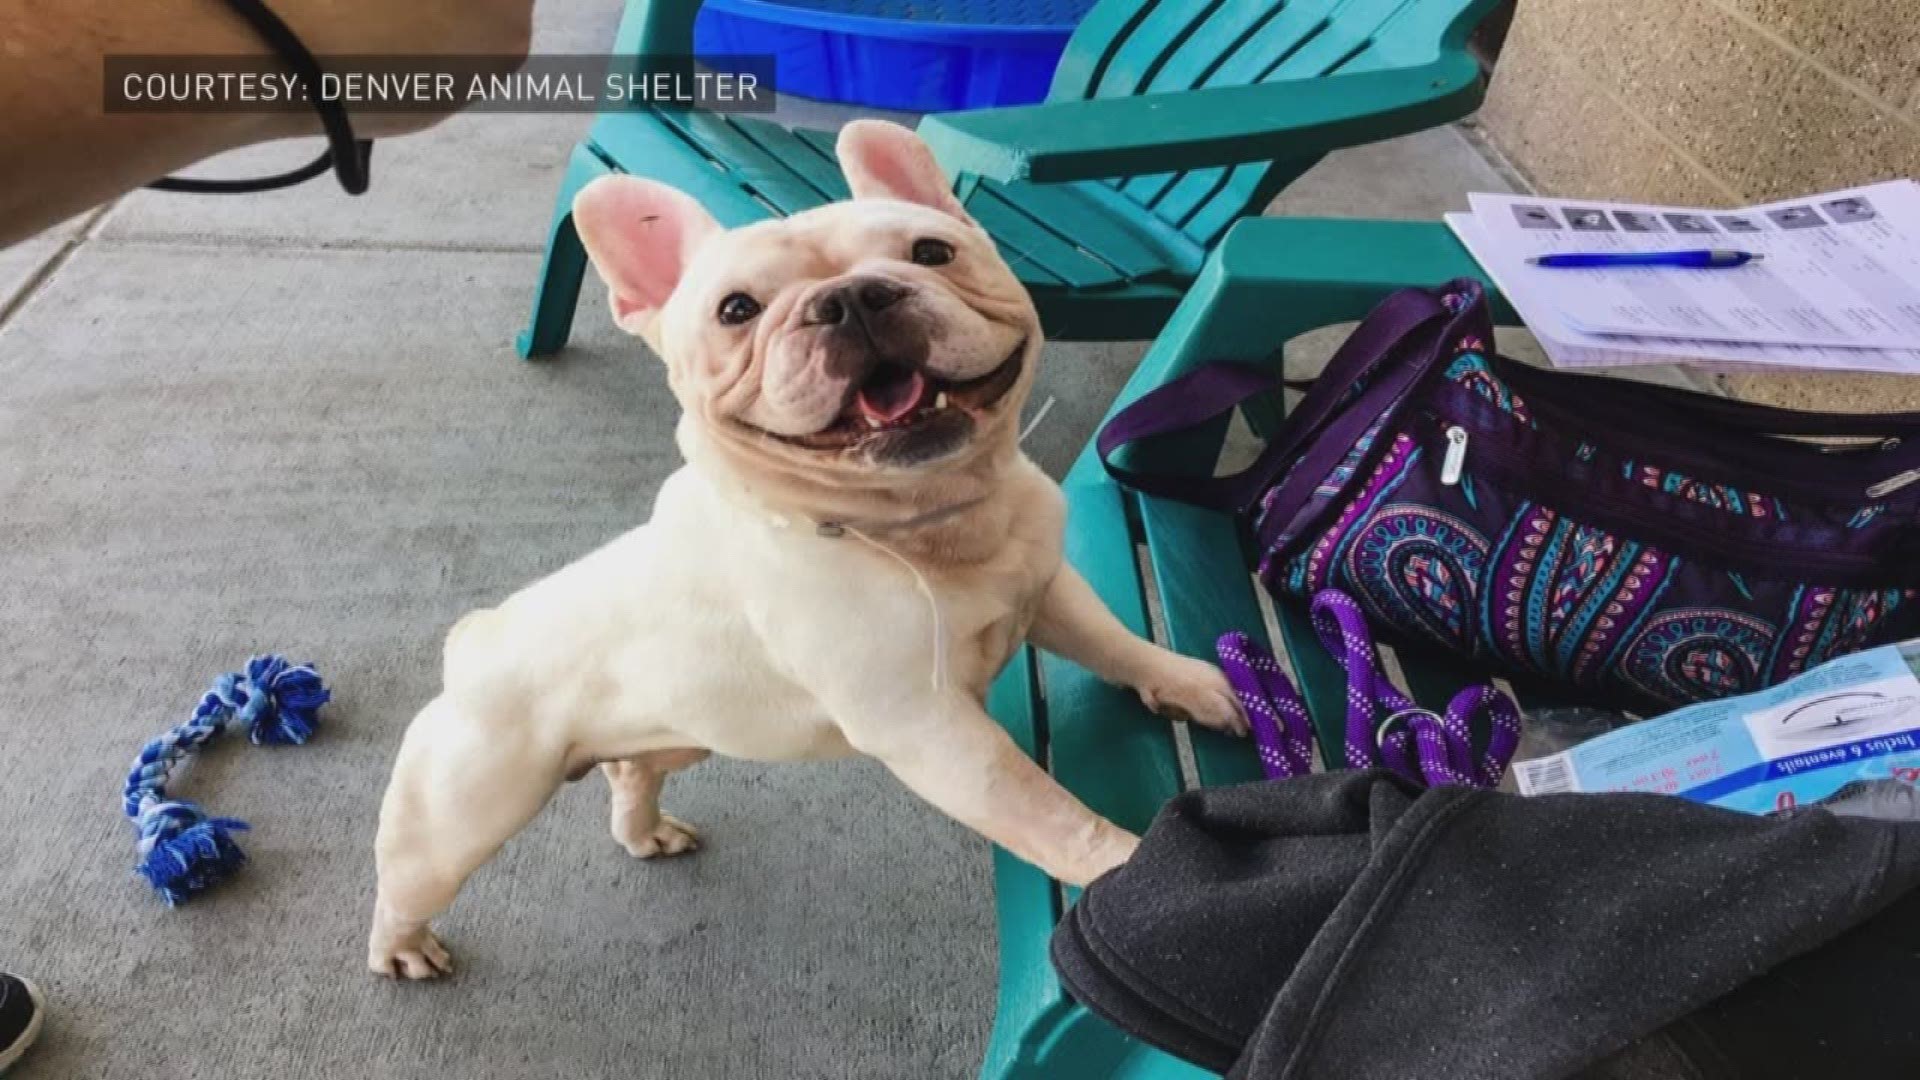 25 rescued french bulldogs going up for adoption Saturday ...